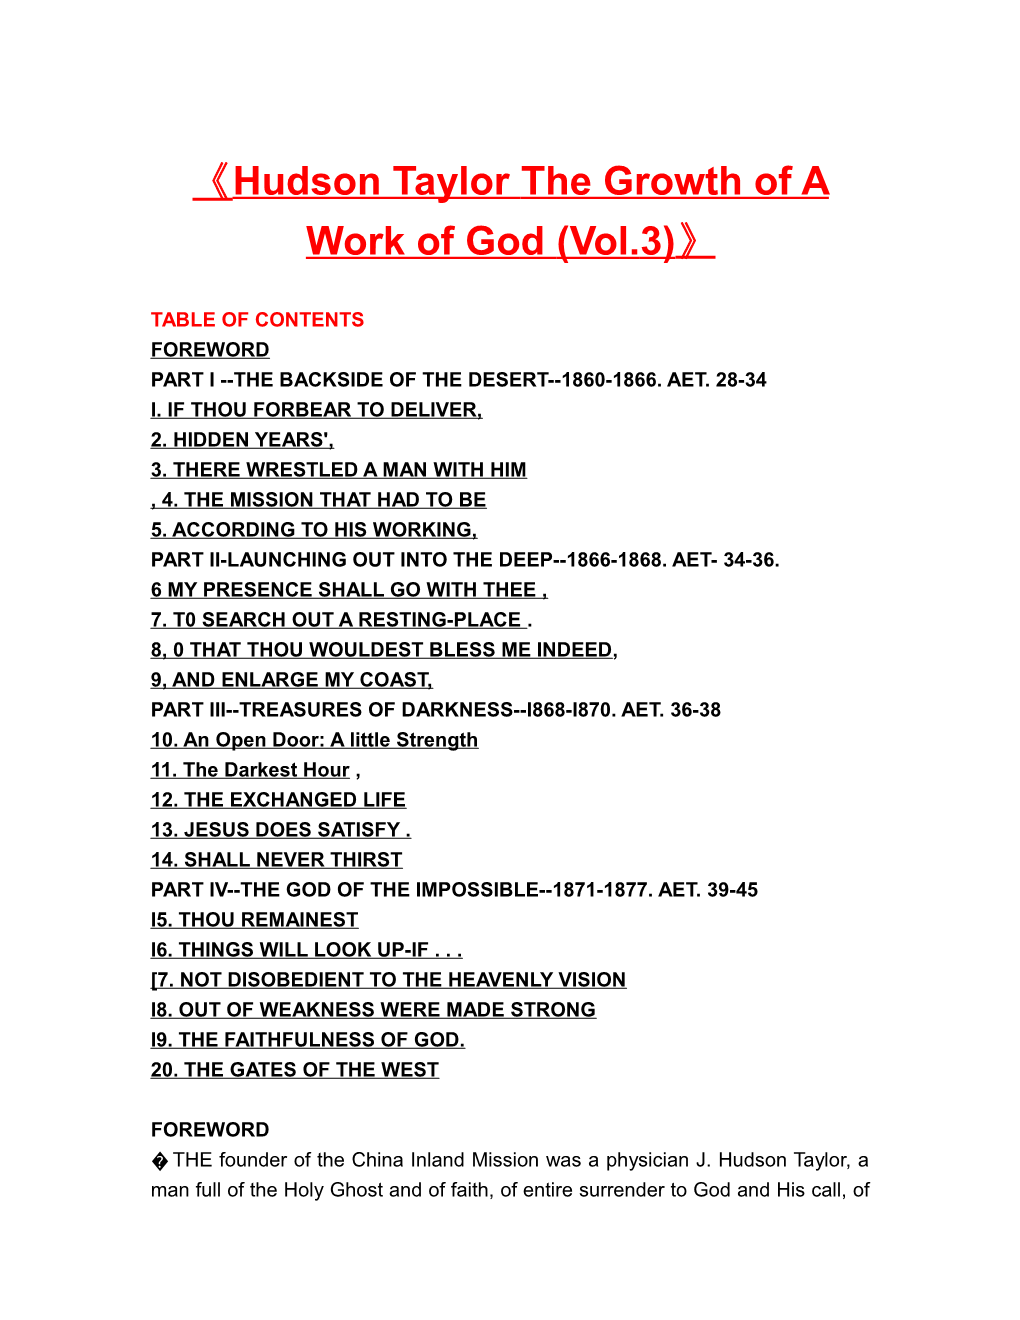 Hudson Taylor the Growth of a Work of God (Vol.3)